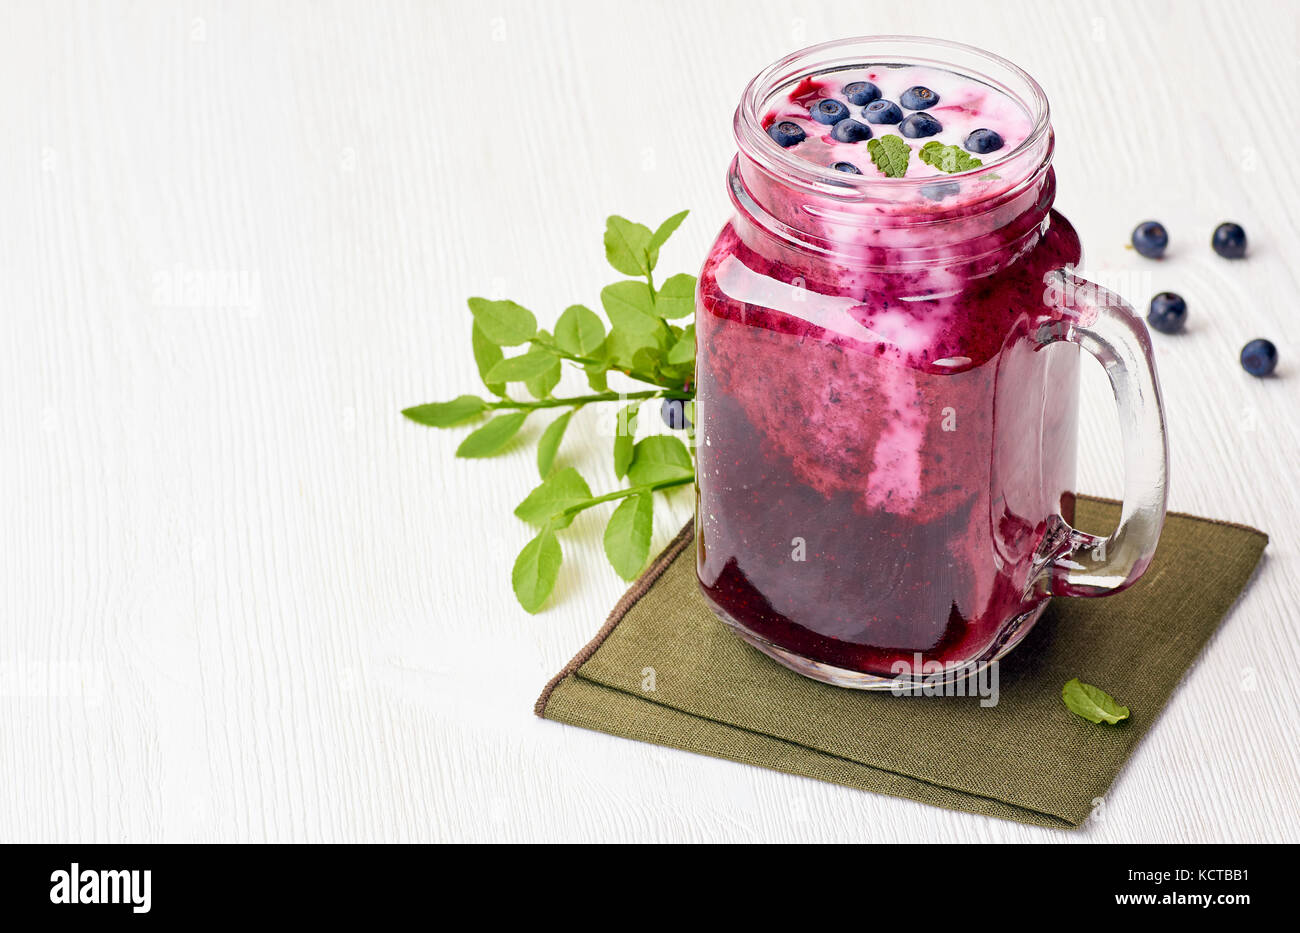 Jar of blueberry smoothie with berries and green leaves Stock Photo